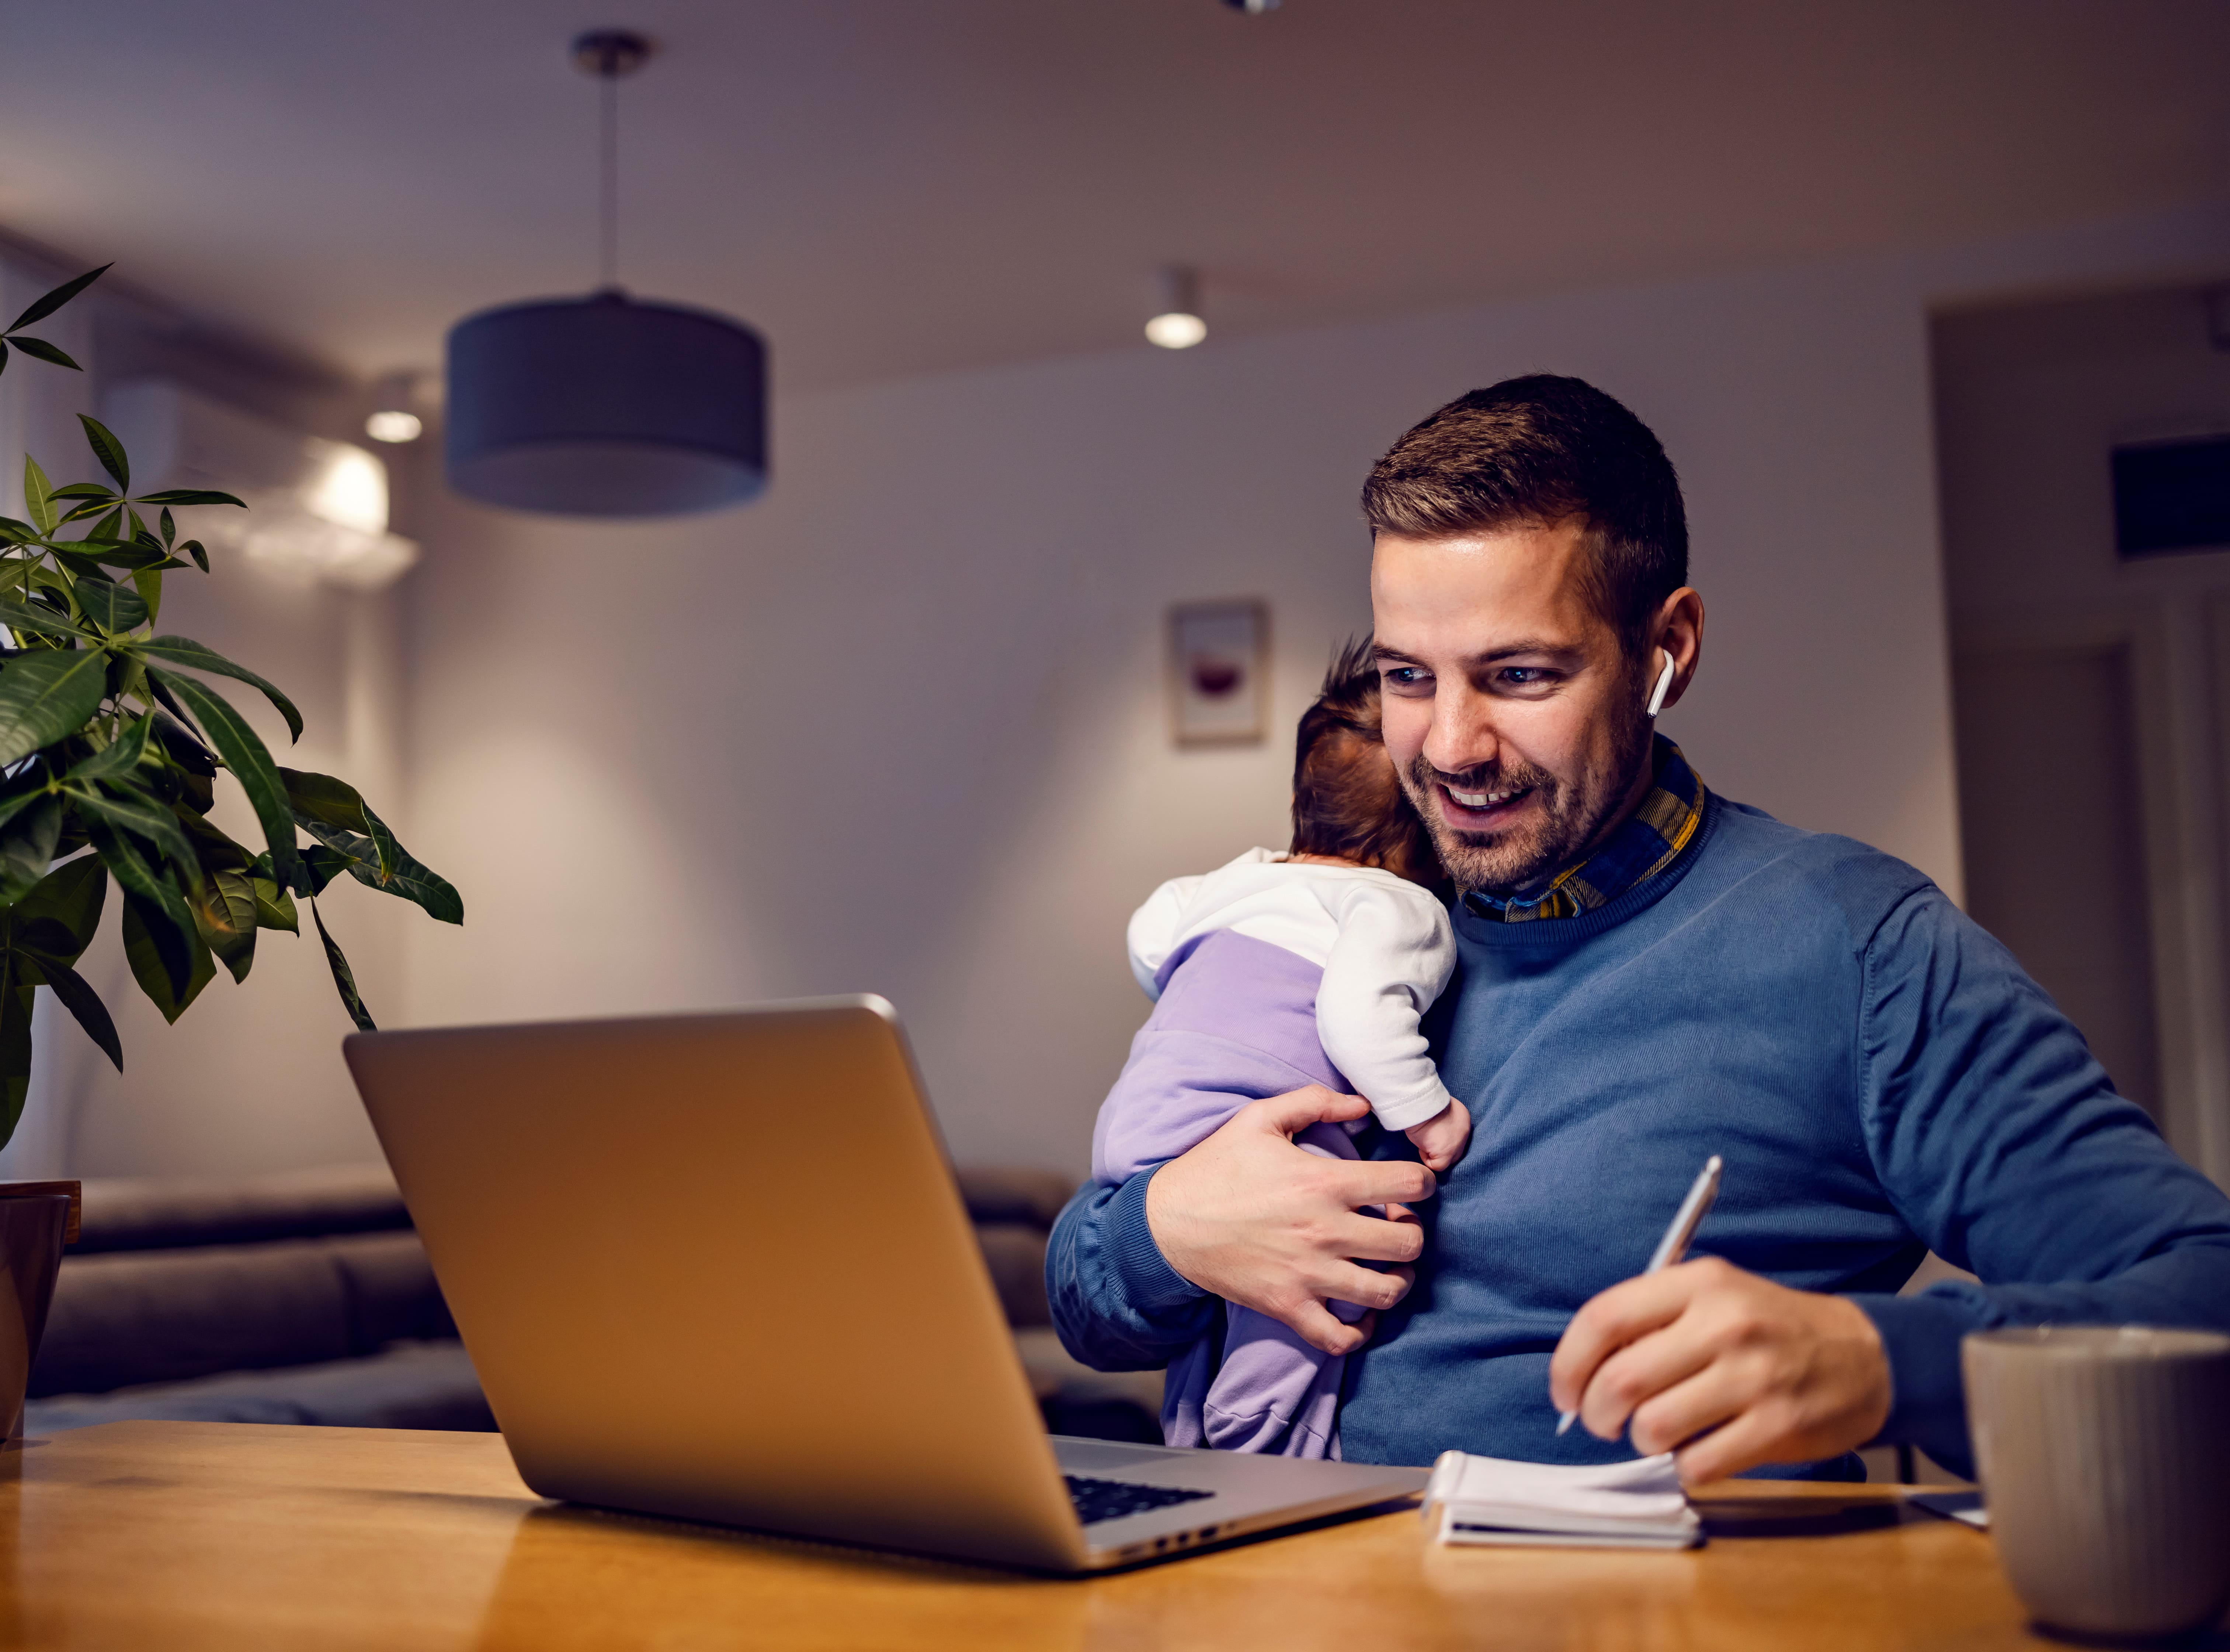 A dad working from home while comforting a new born baby as he takes meeting notes with a pen and paper.